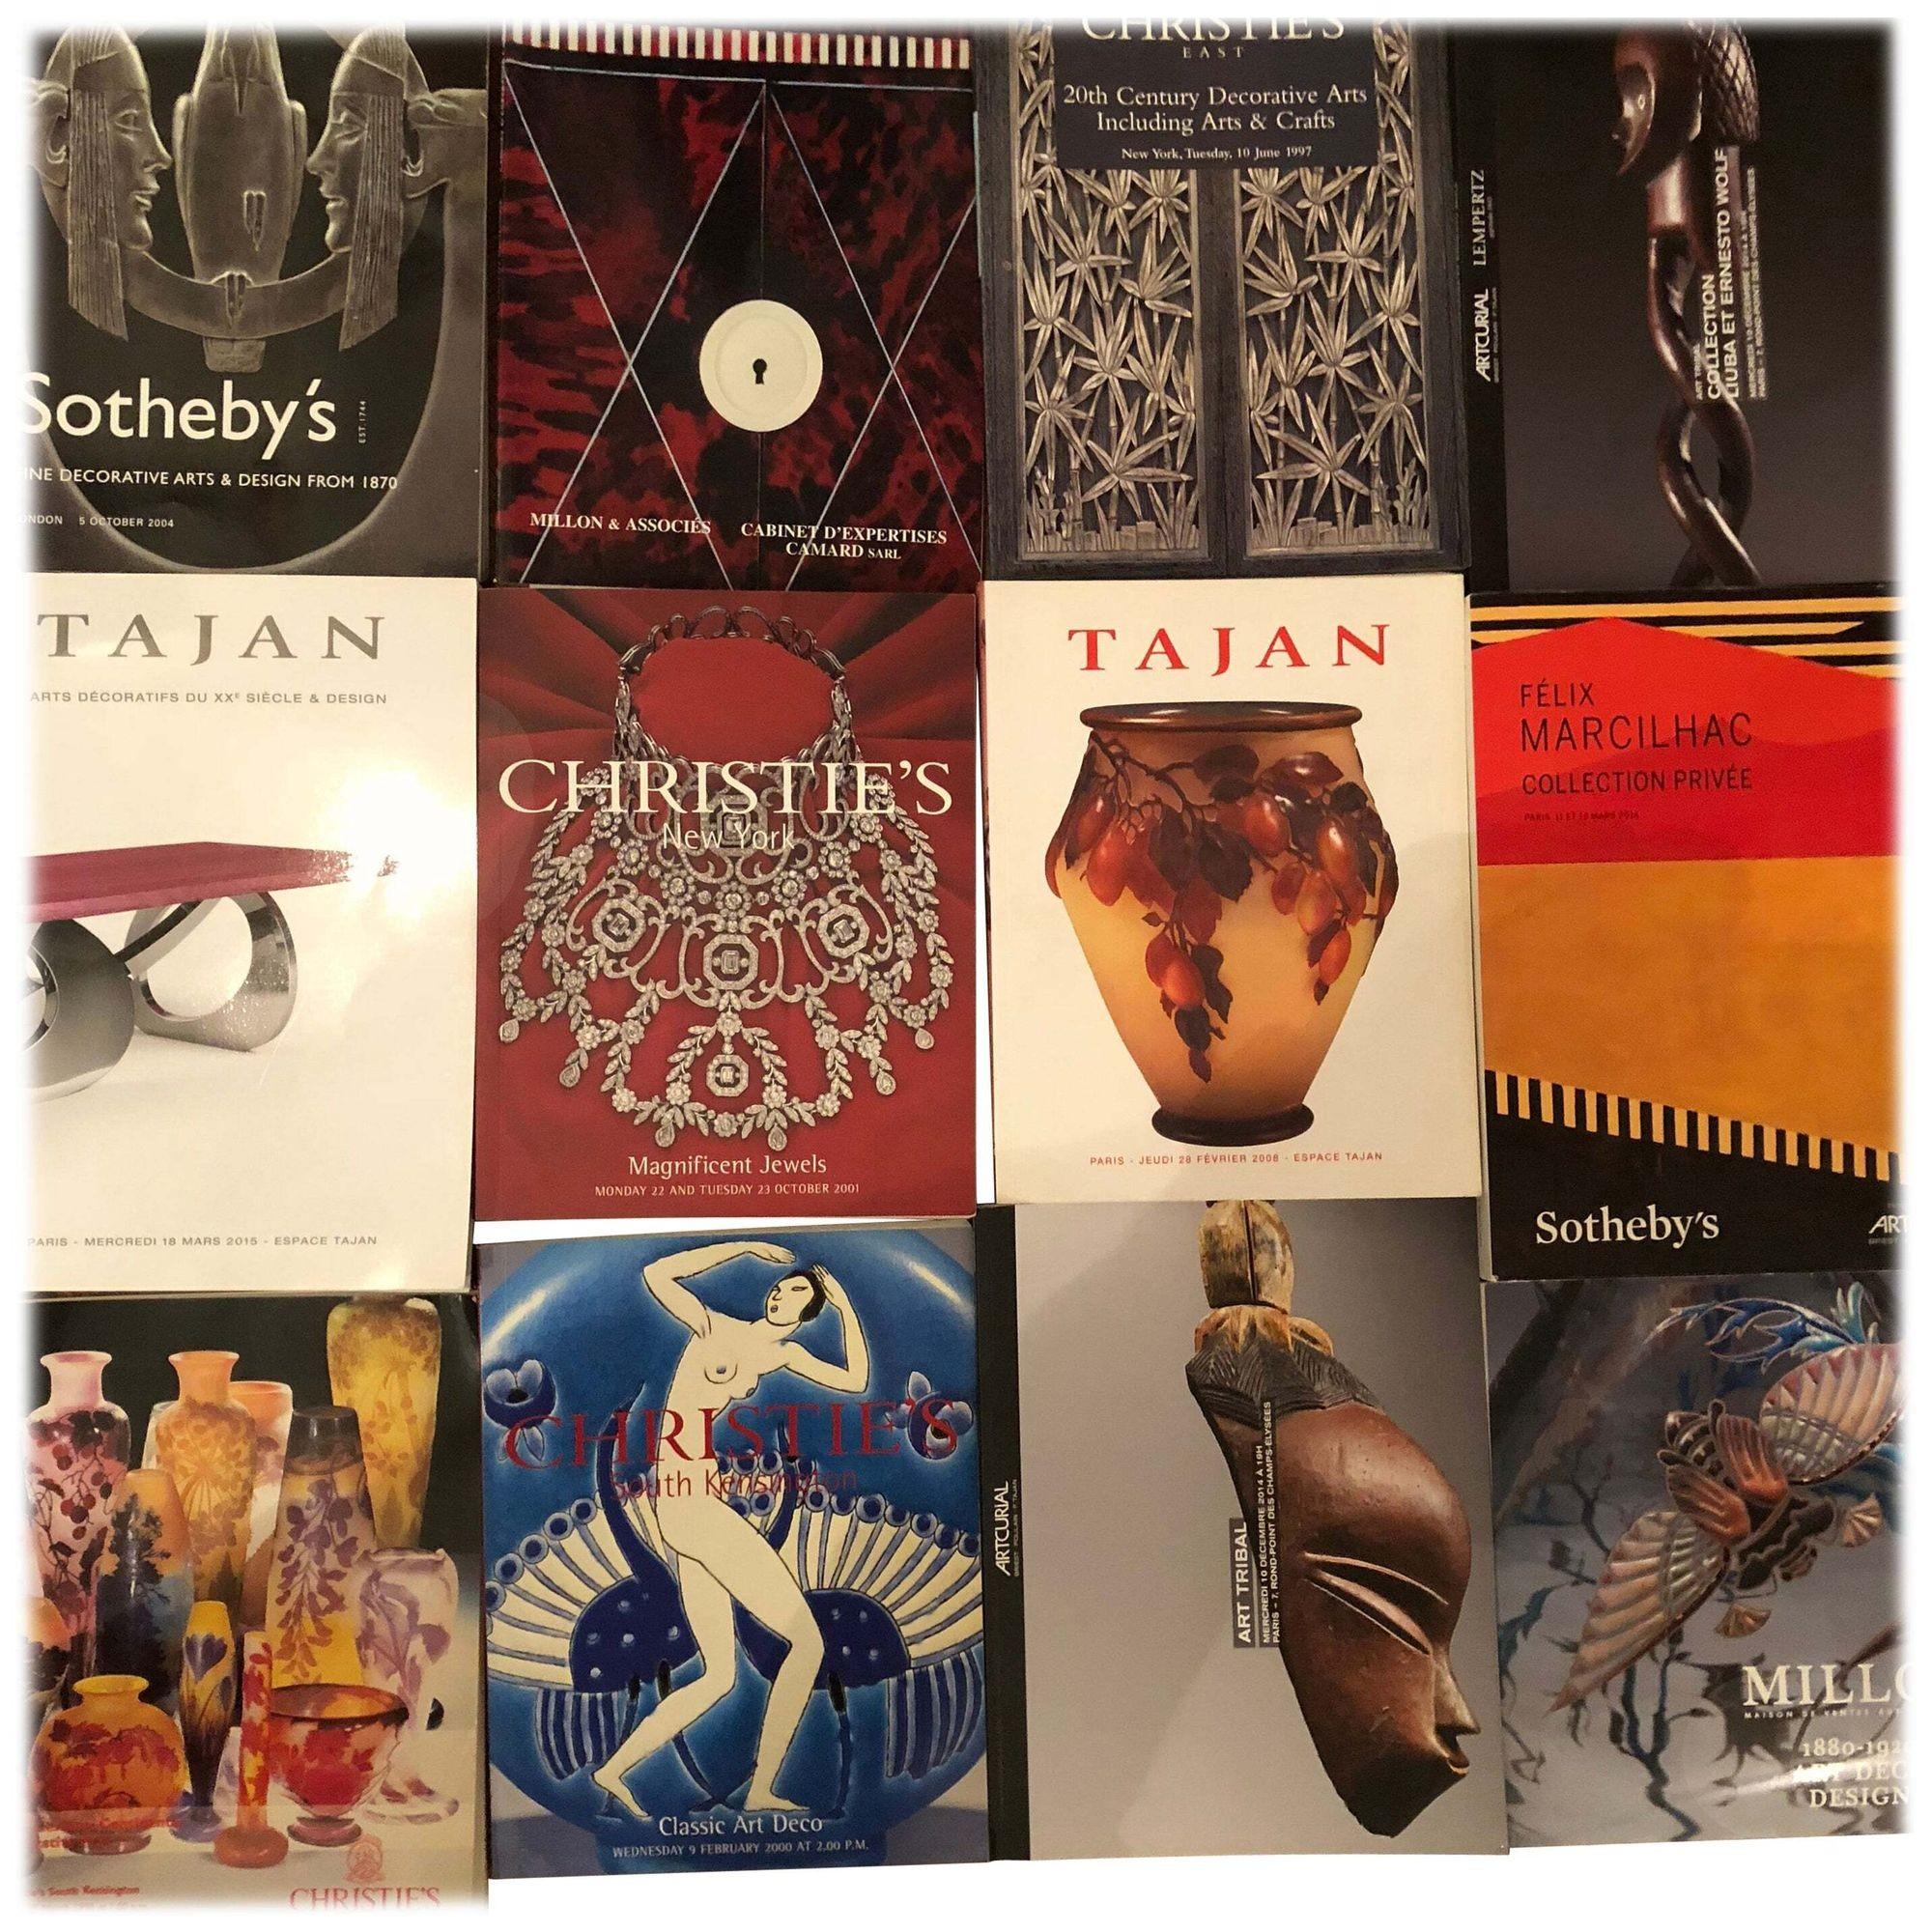 For sale about 500 auction catalogues from 1980s to present, about Art Nouveau, Art Deco, 20th century decorative arts.
Auction houses: Sotheby's, Christie's, Philips, Bonhams, Tajan, Millon, Artcurial, more American and French auctions.